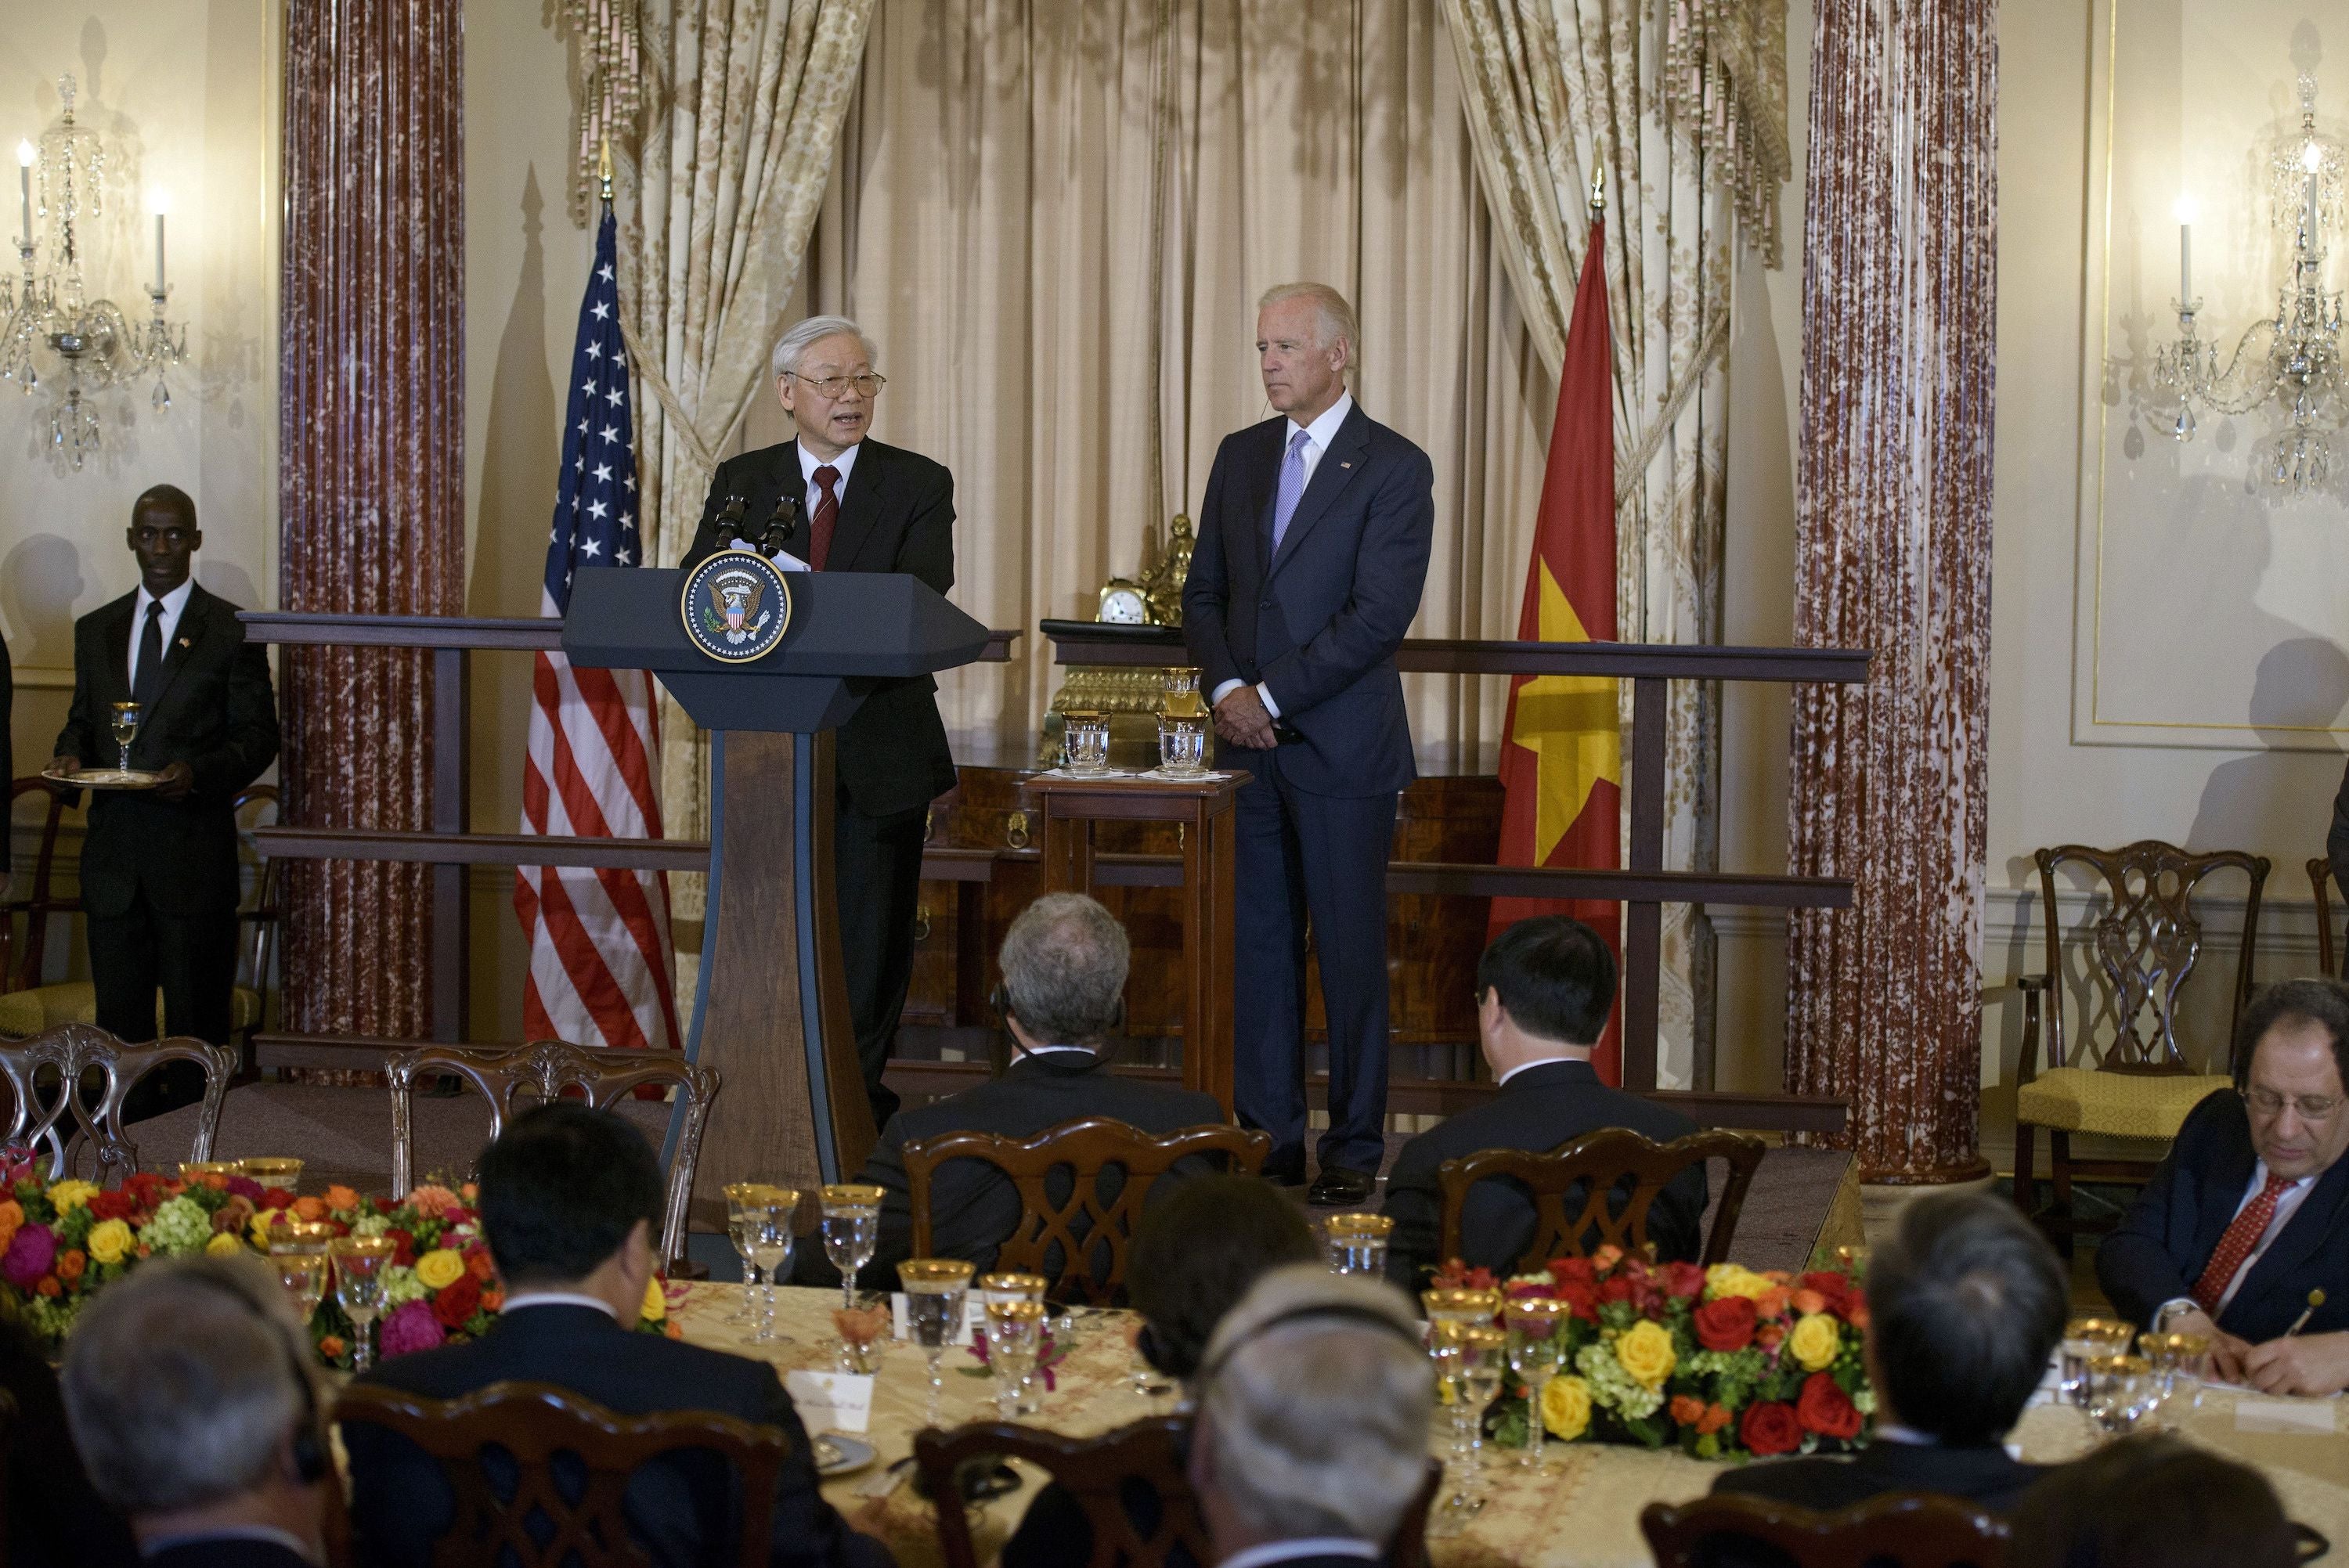 Vietnamese Communist Party General Secretary Nguyen Phu Trong, left, speaks before a luncheon with then United States Vice President Joe Biden at the US State Department, Washington, DC, July 7, 2015.